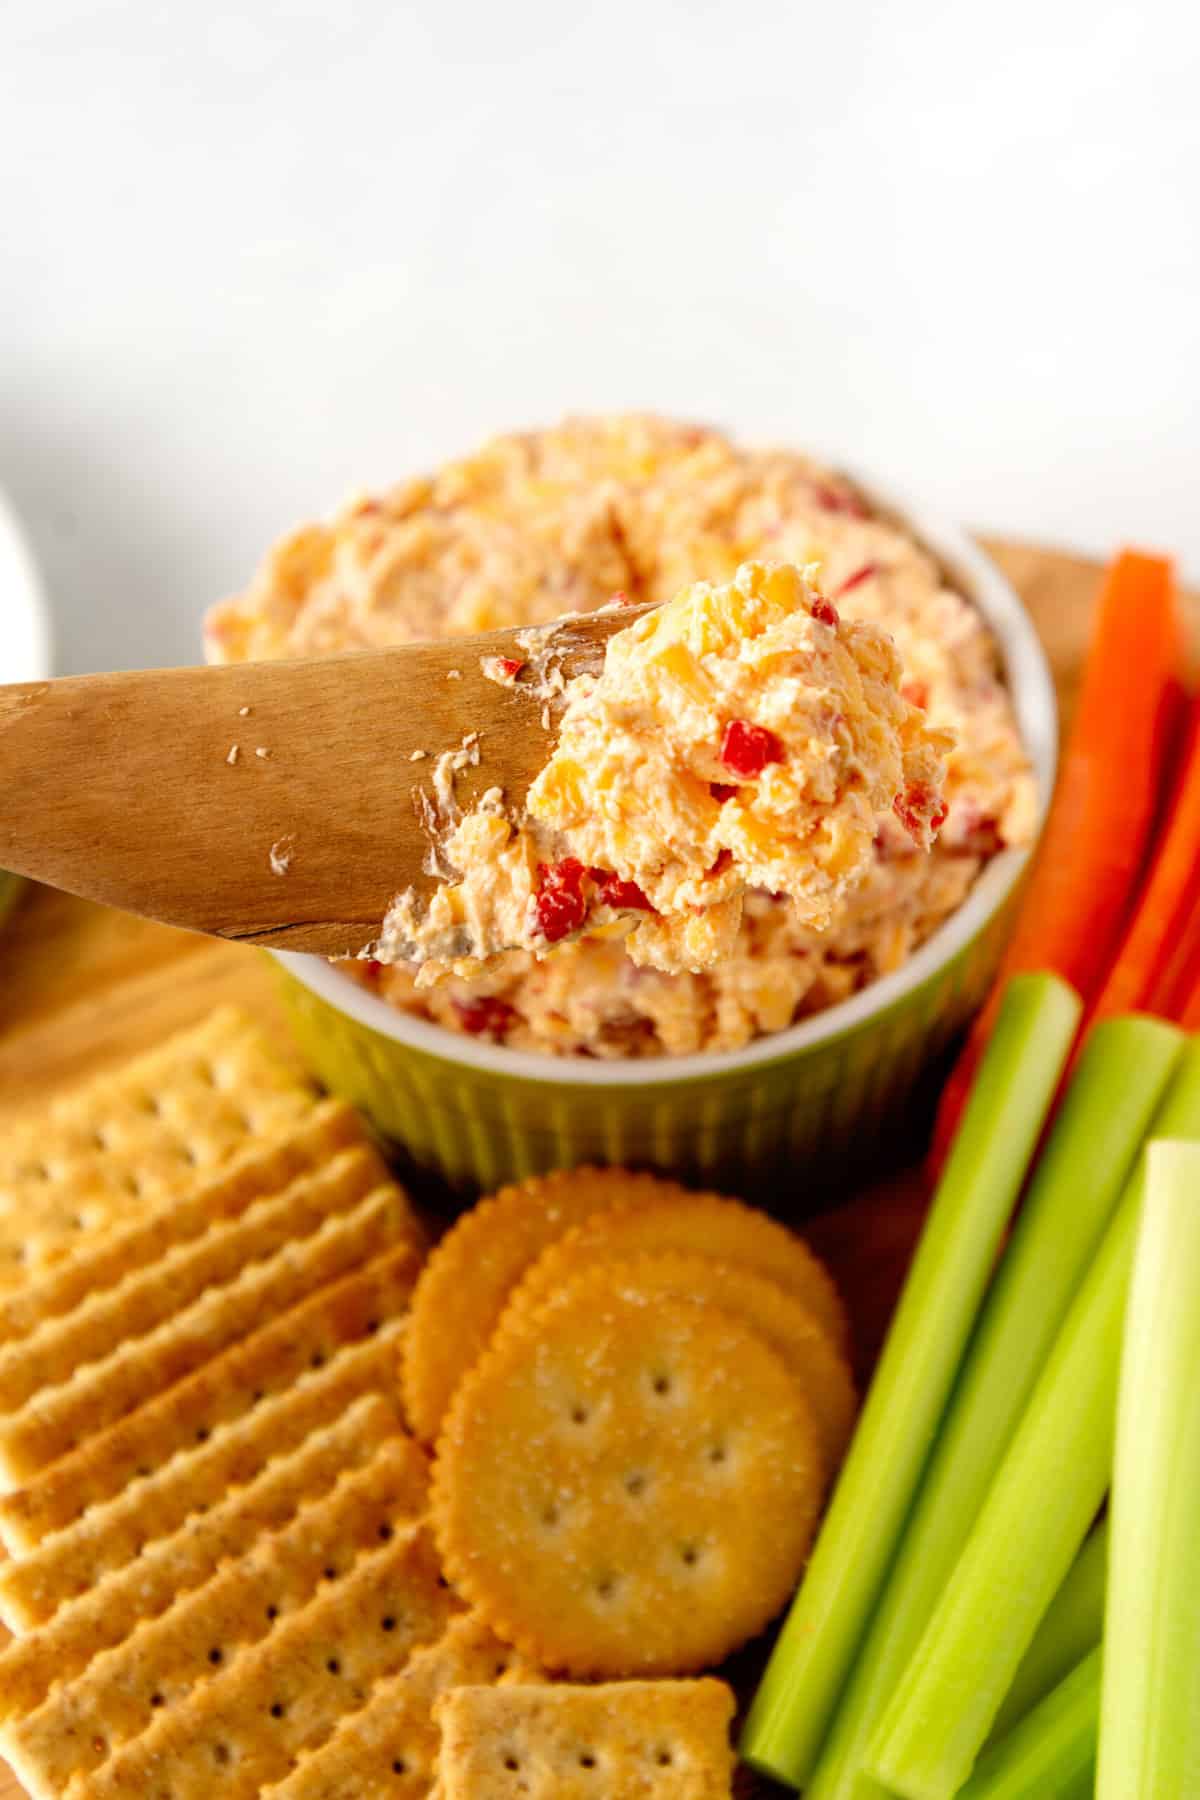 wooden spoonful of pimento cheese dip with a variety of crackers and cut vegetebles in the background sitting on a wooden board